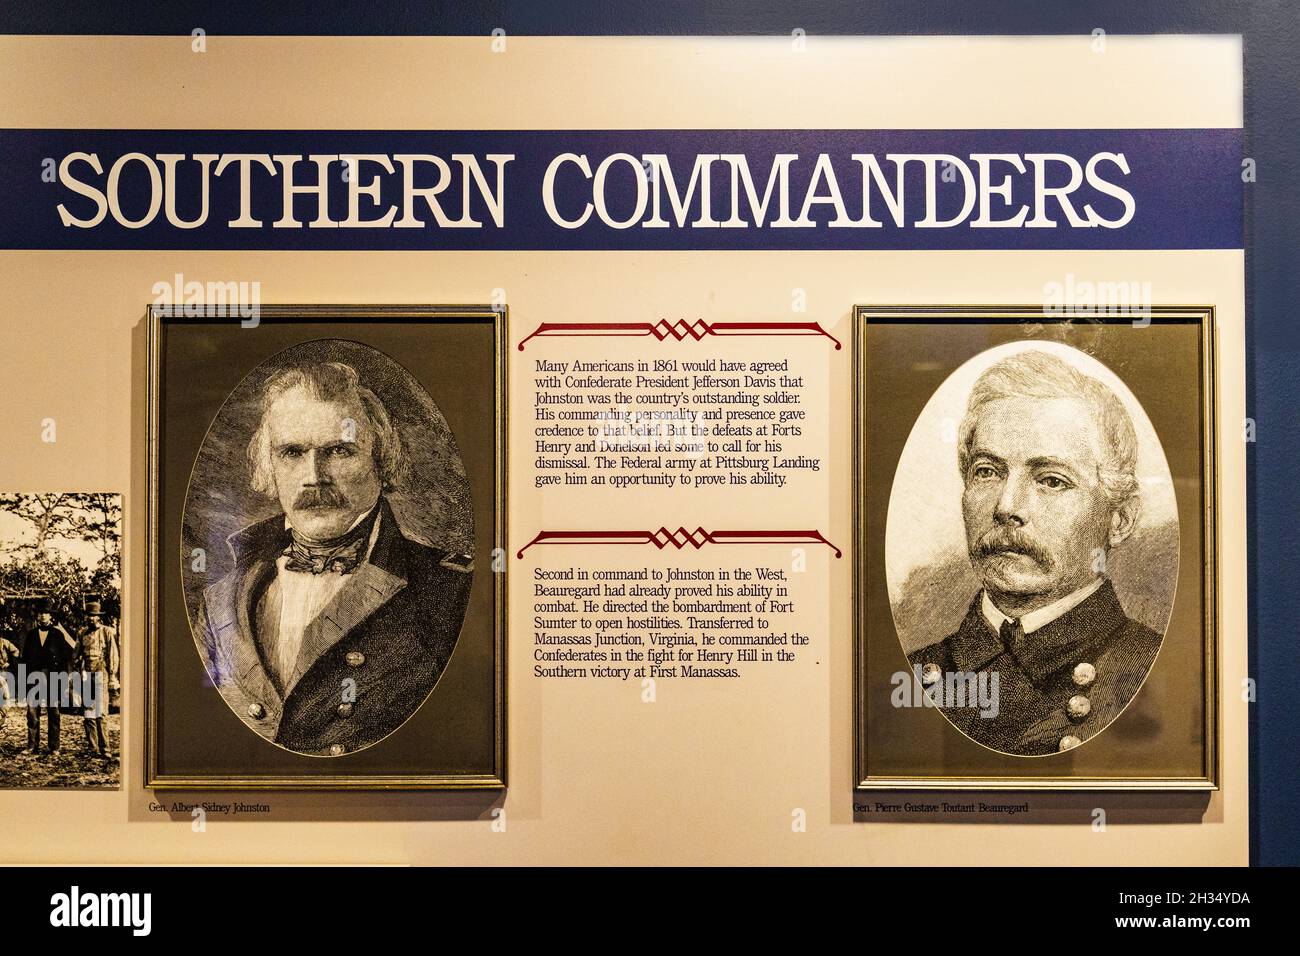 Southern Commanders wall display inside the Visitor Center at the Shiloh National Military Park in Tennessee. Stock Photo